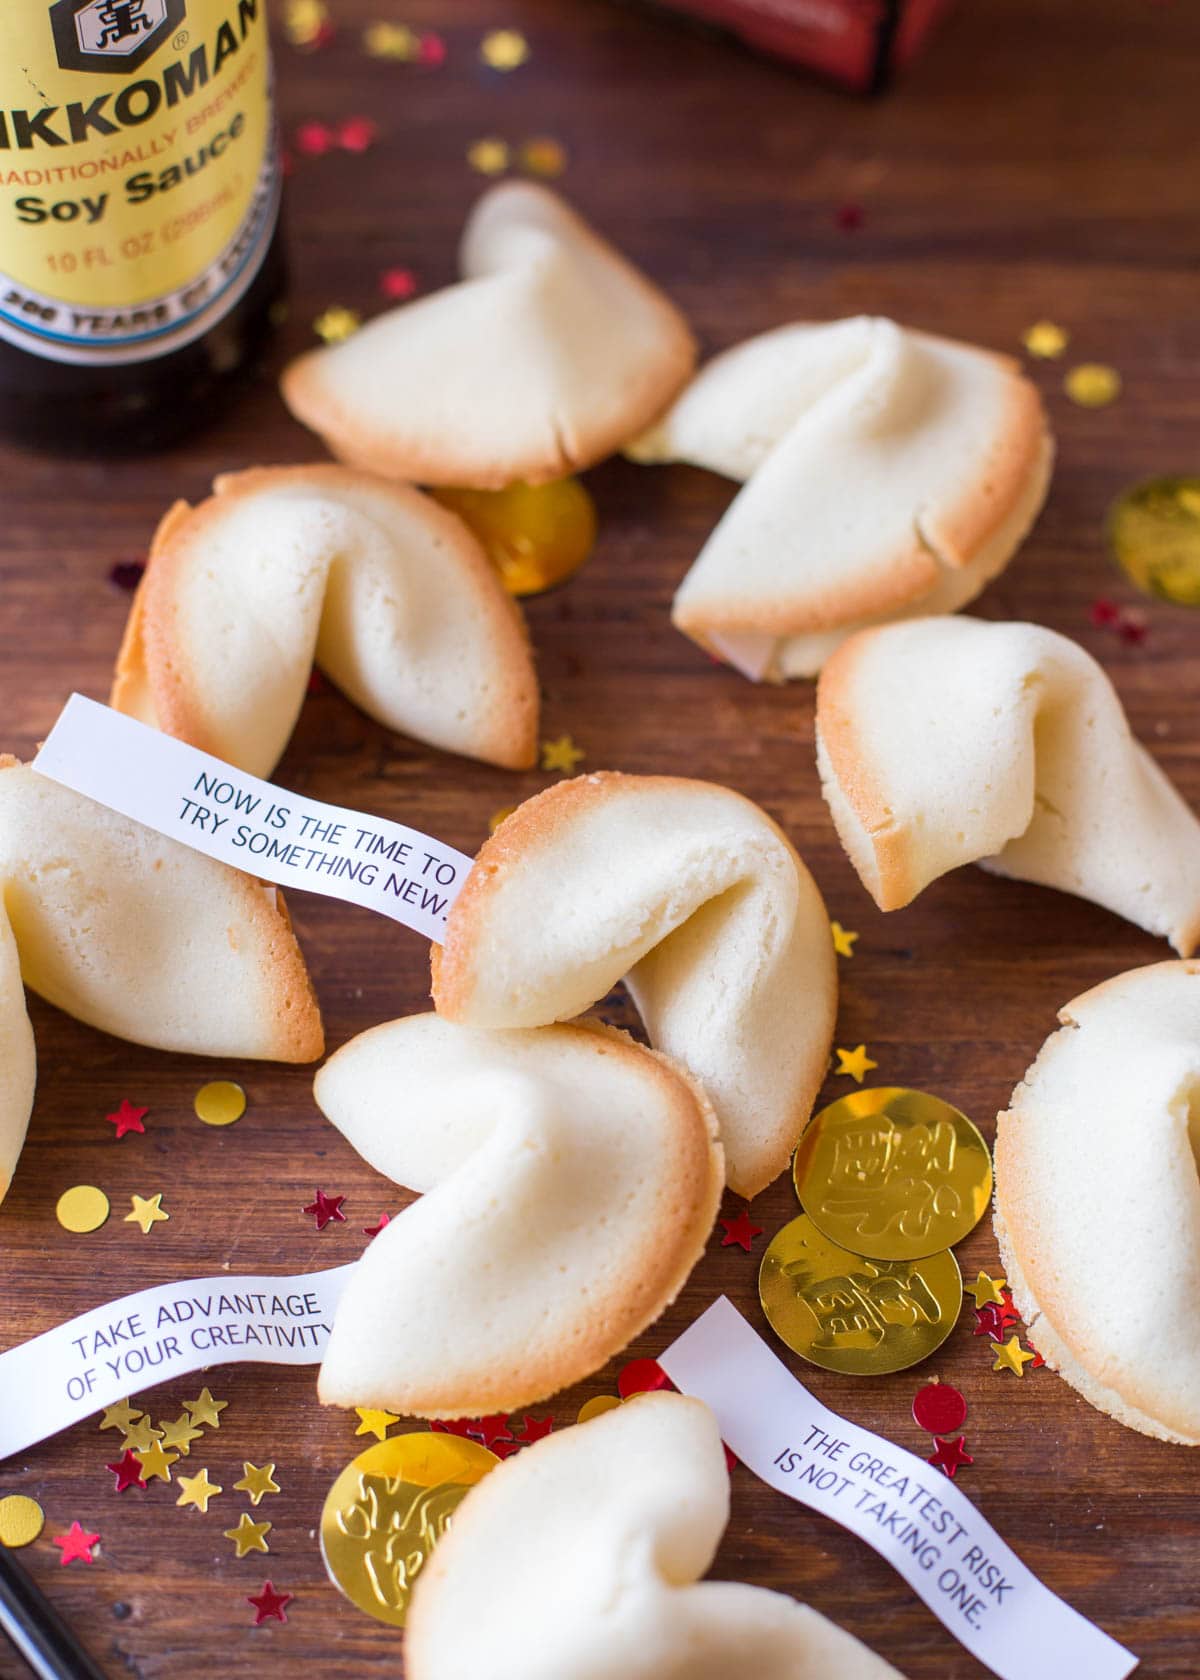 Fortune cookies filled with fortunes